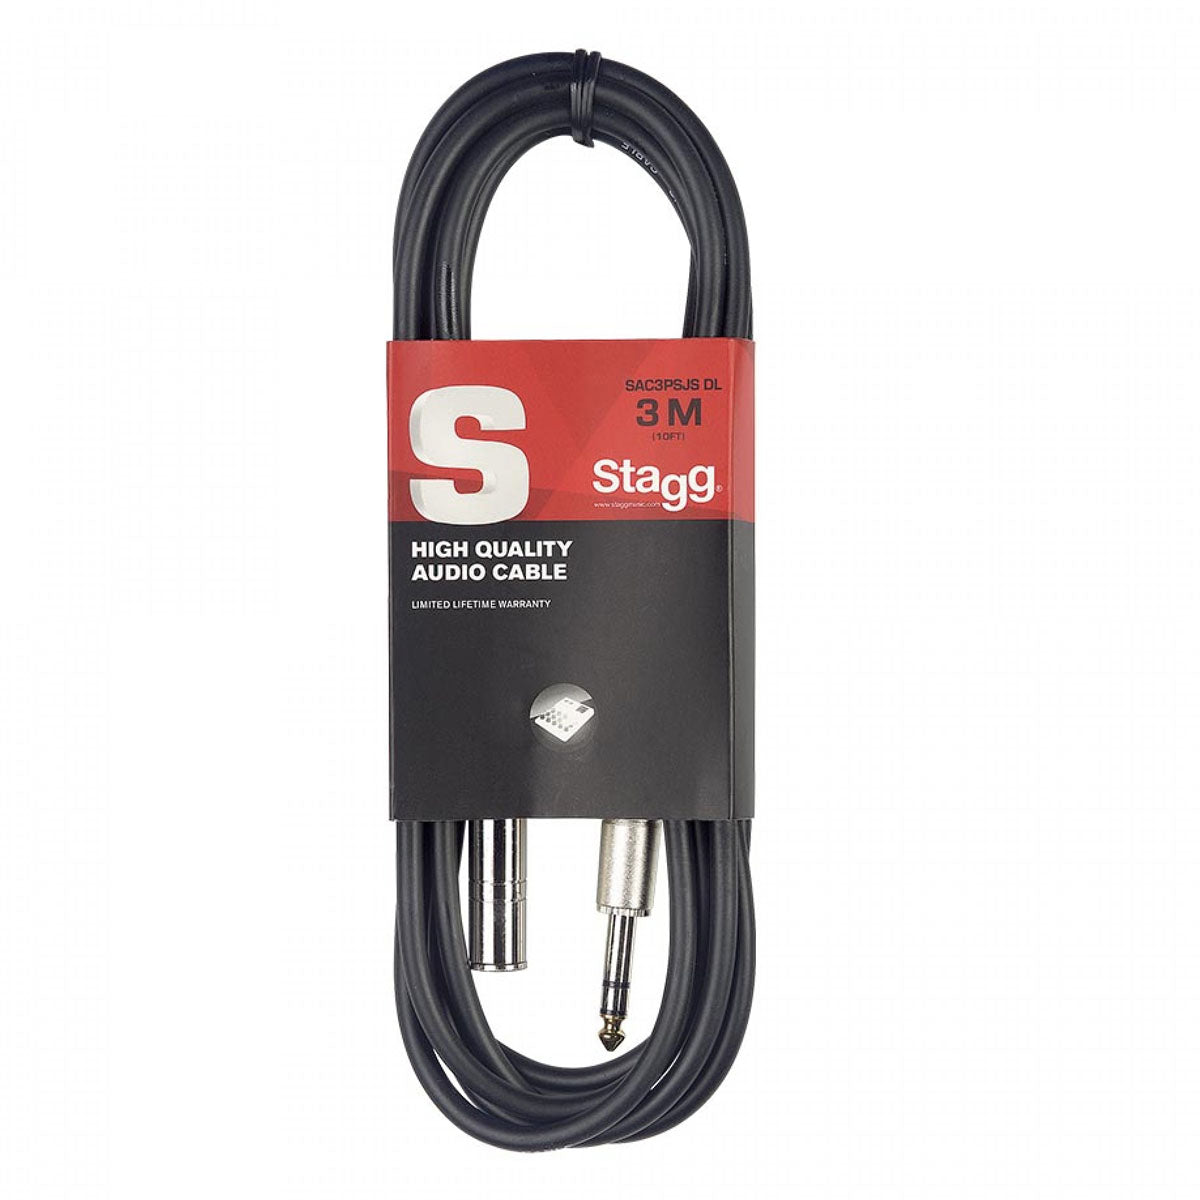 Stagg S-Series Audio Cable - 1/4" Stereo Jack Plug to 1/4" Stereo Jack Socket